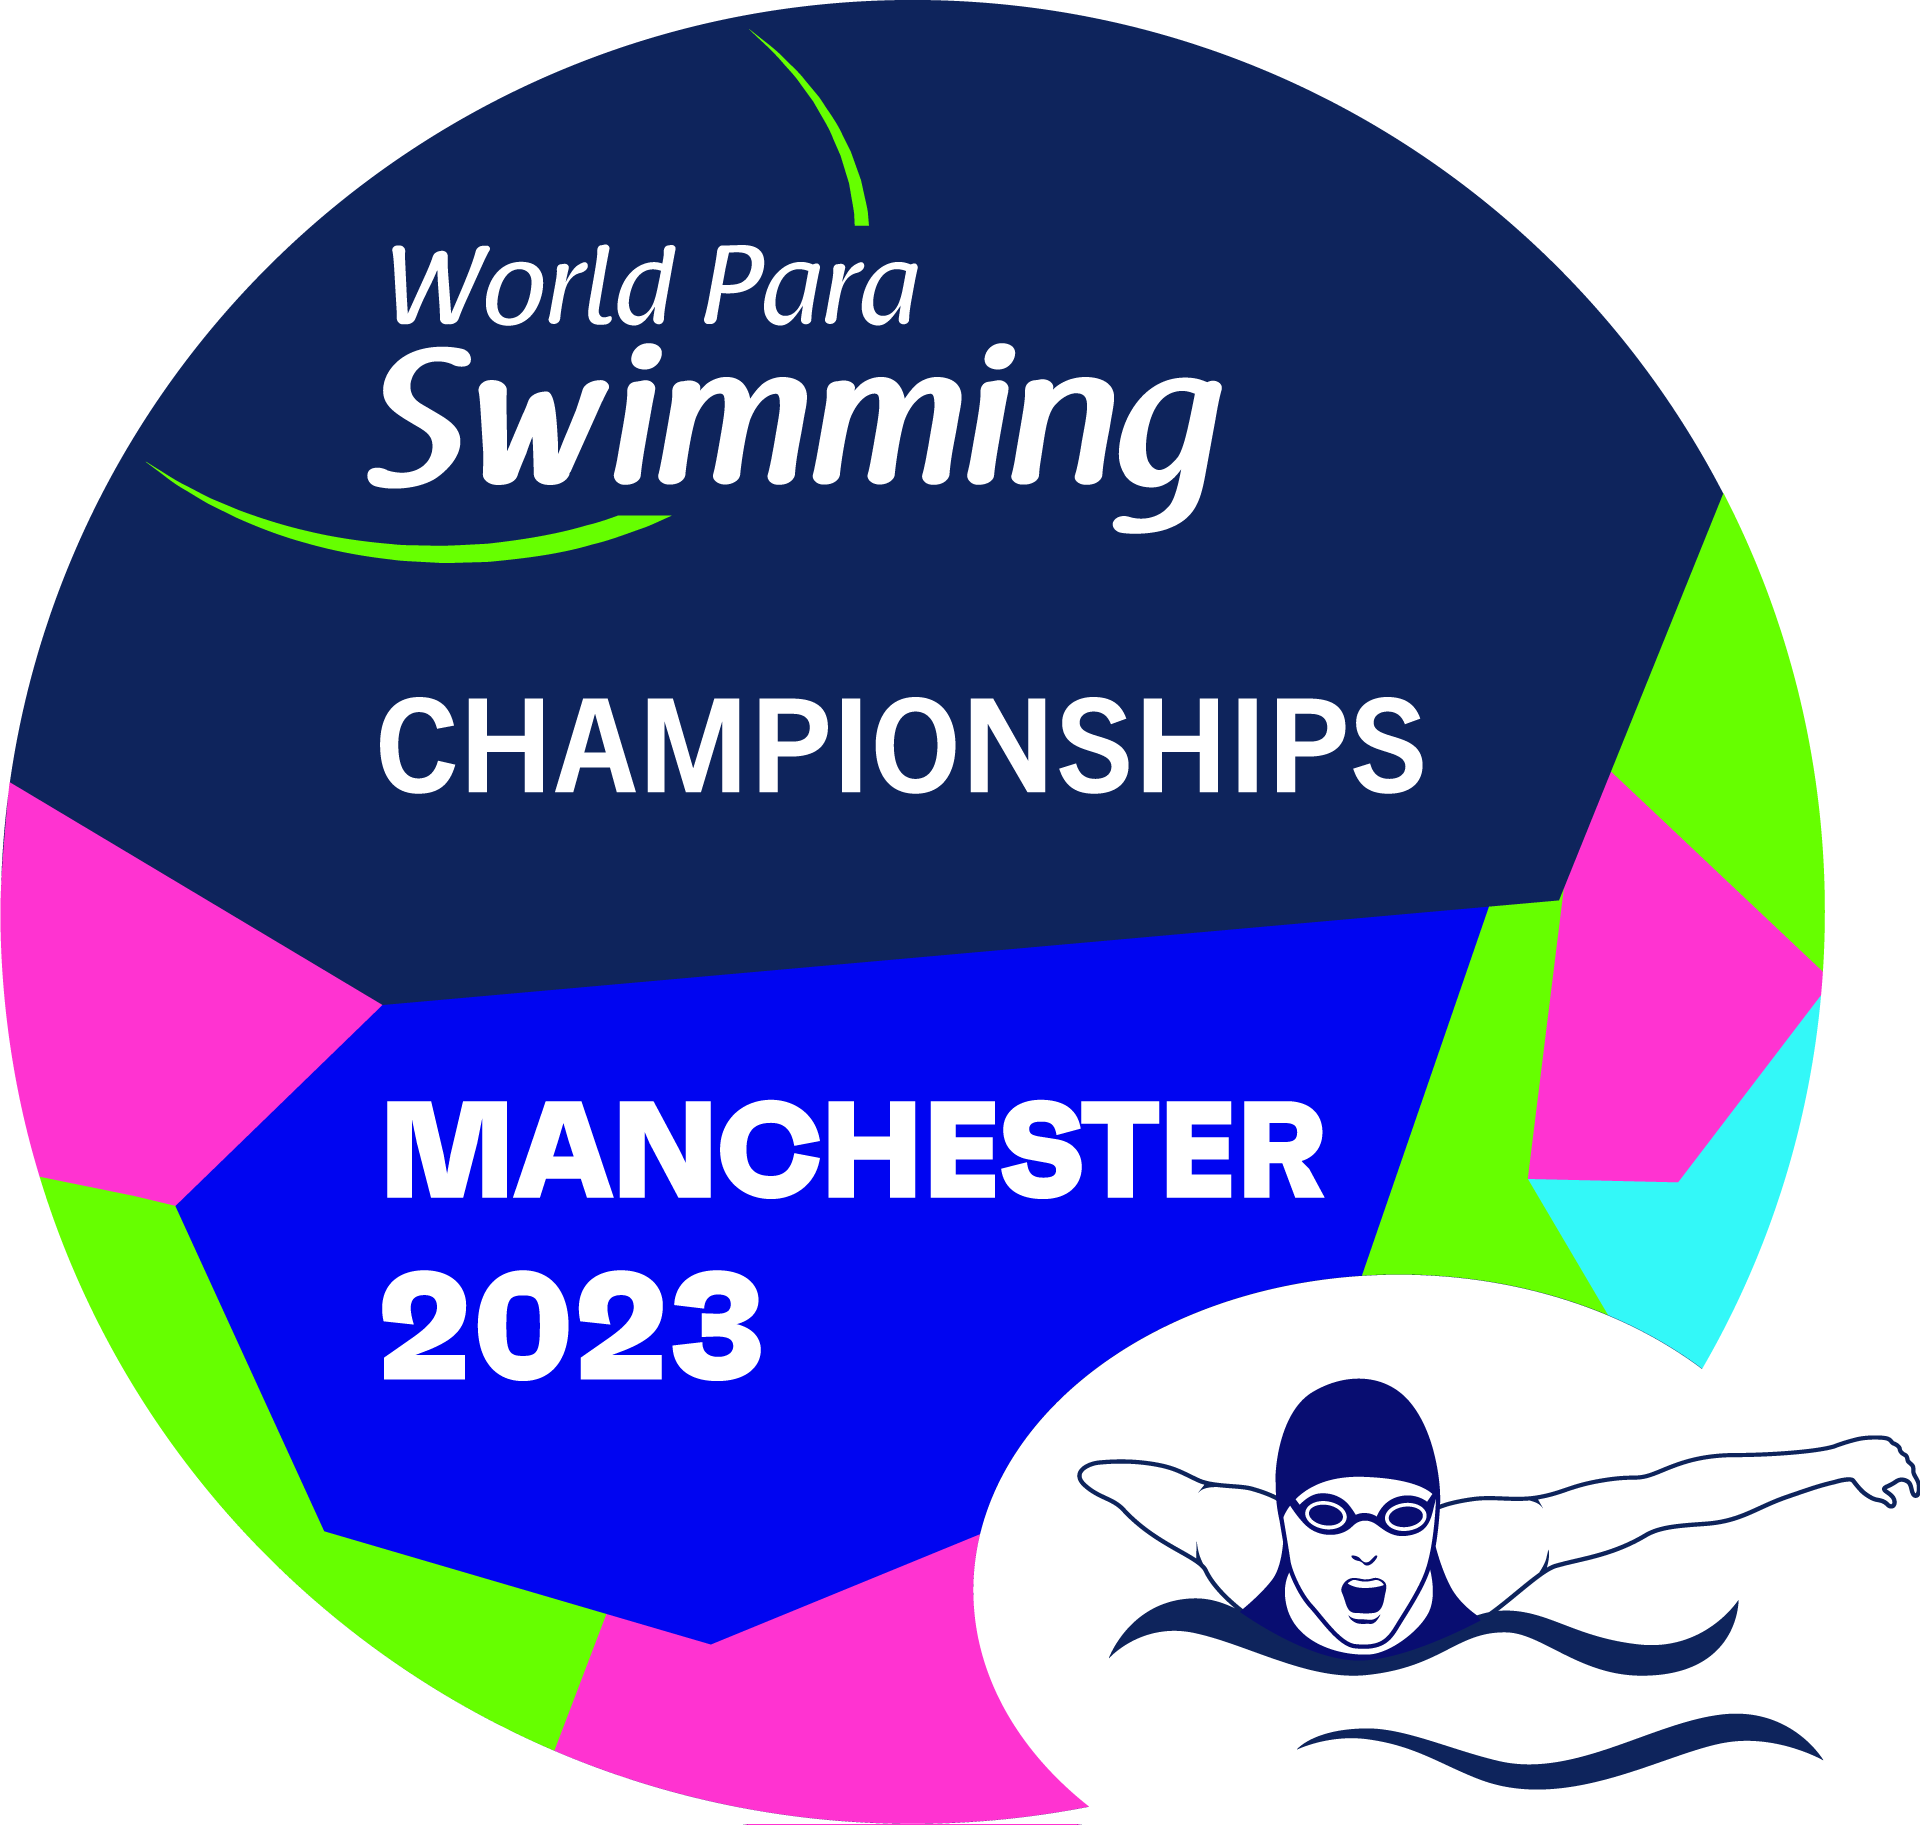 LIVE COVERAGE OF 2023 WORLD PARA SWIMMING CHAMPIONSHIPS PRESENTED BY XFINITY BEGINS MONDAY, JULY 31, IN MANCHESTER ON PEACOCK